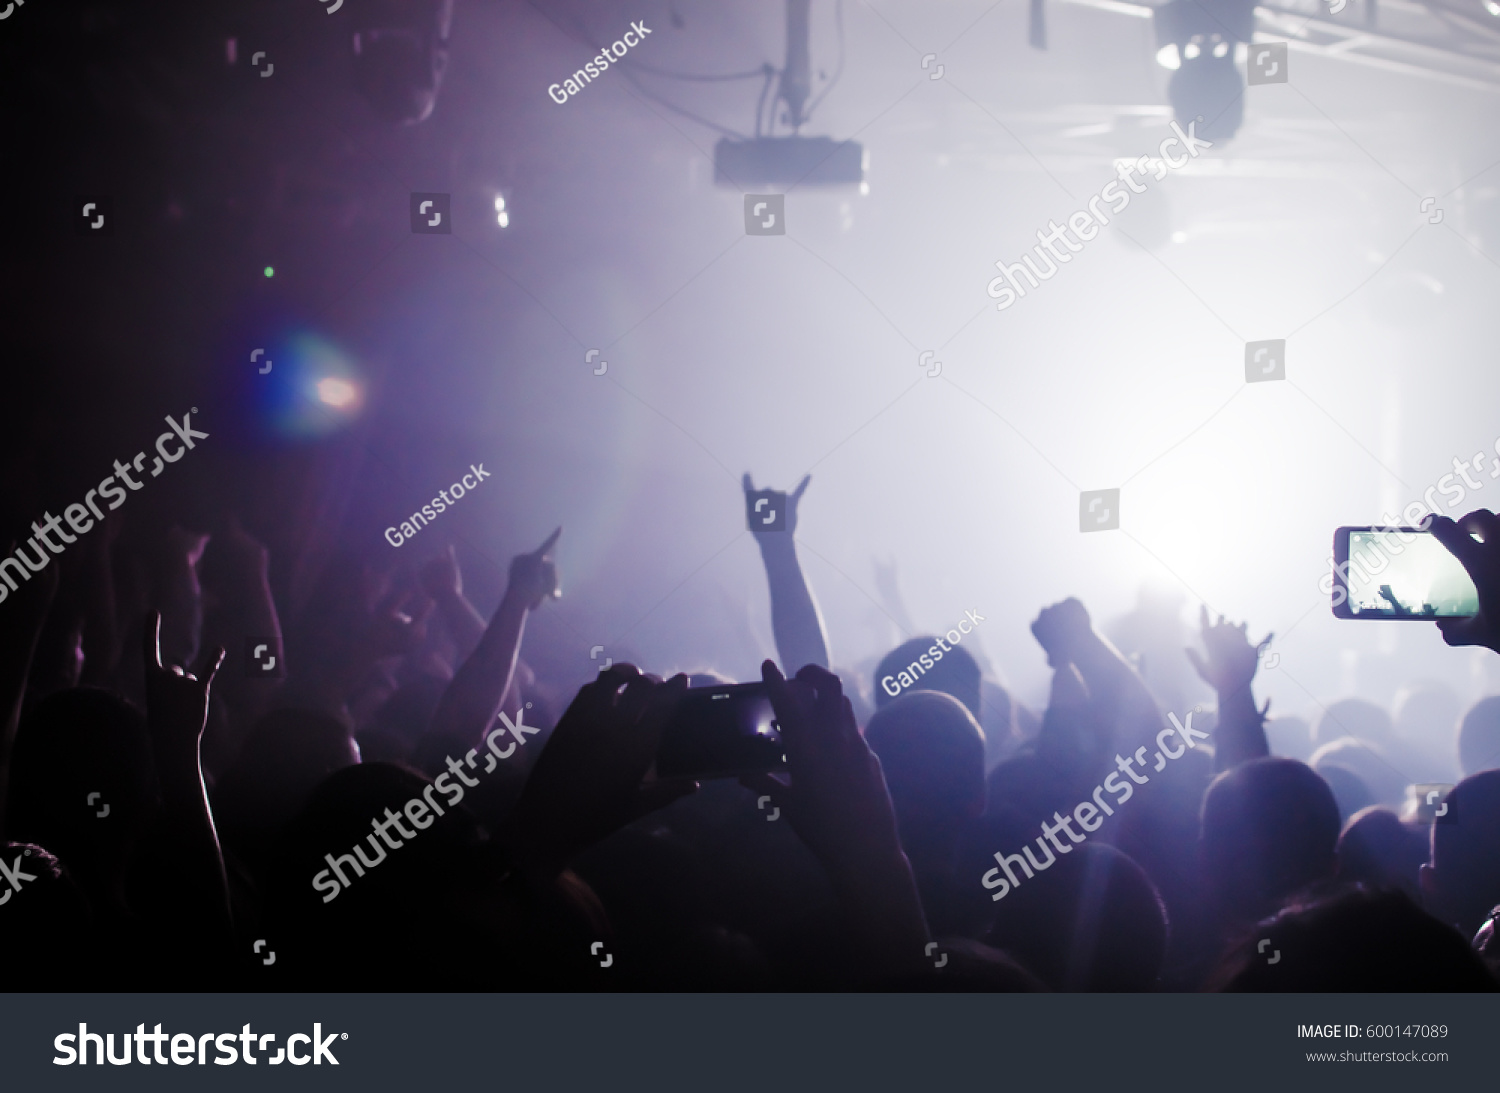 silhouettes of people at a rock festival concert in front of the scene in bright light #600147089